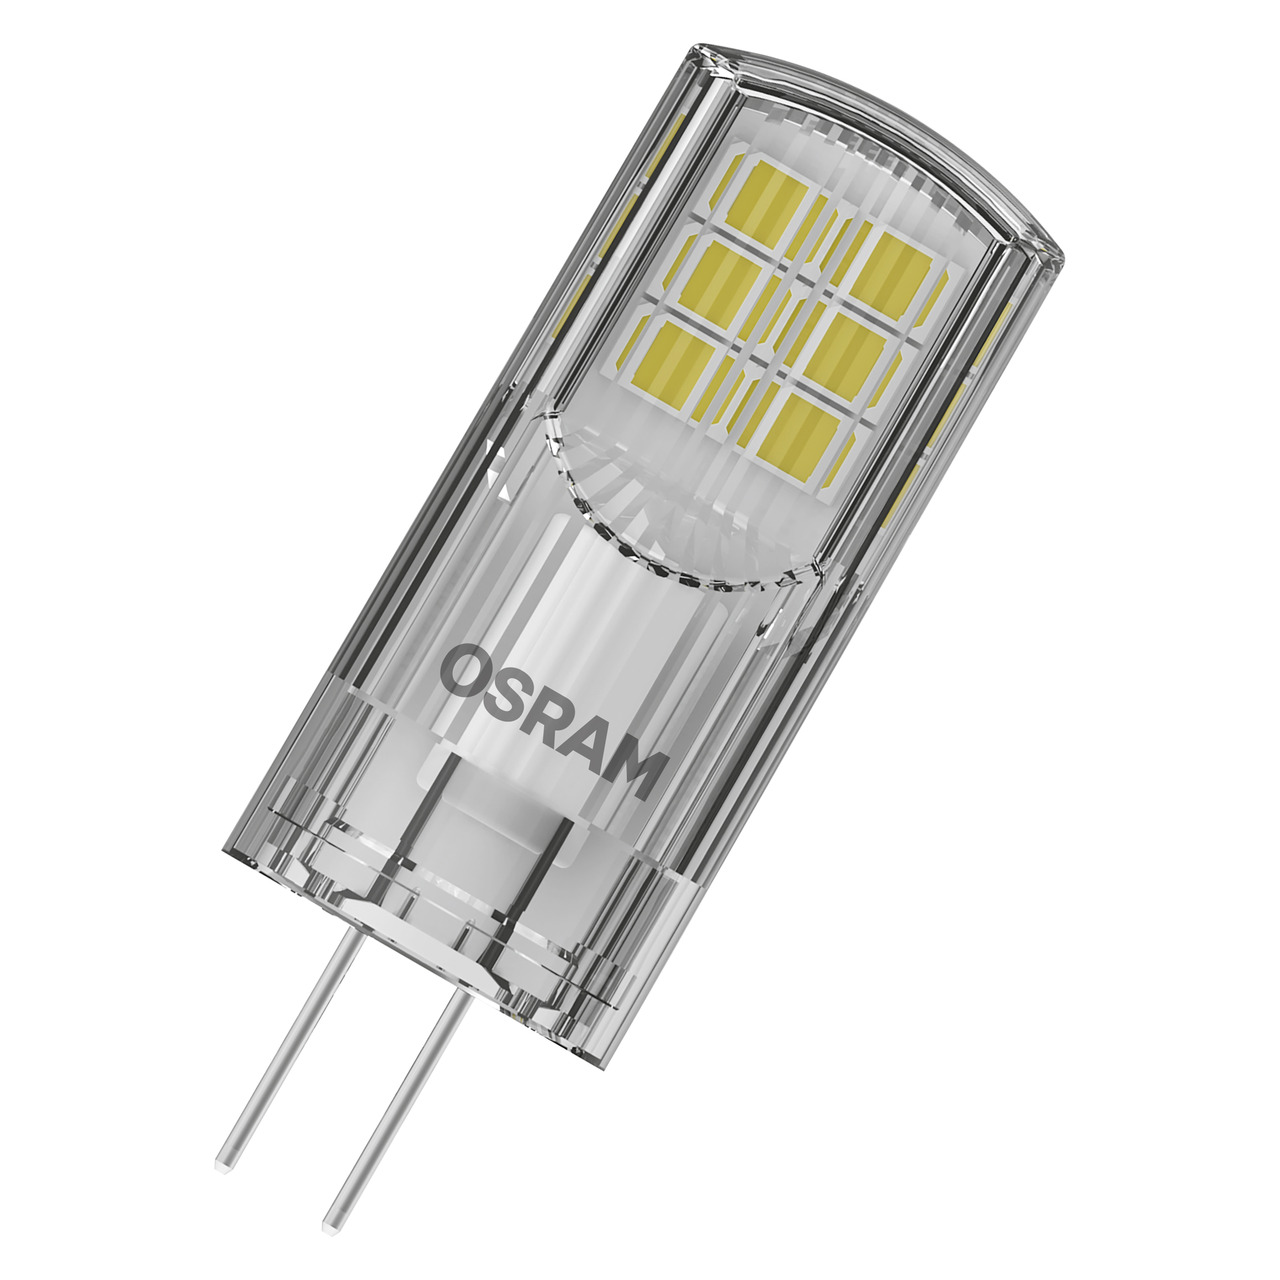 OSRAM 2-6-W-LED-Lampe T14- G4- 300 lm- warmweiss- 320- 12 V unter Beleuchtung